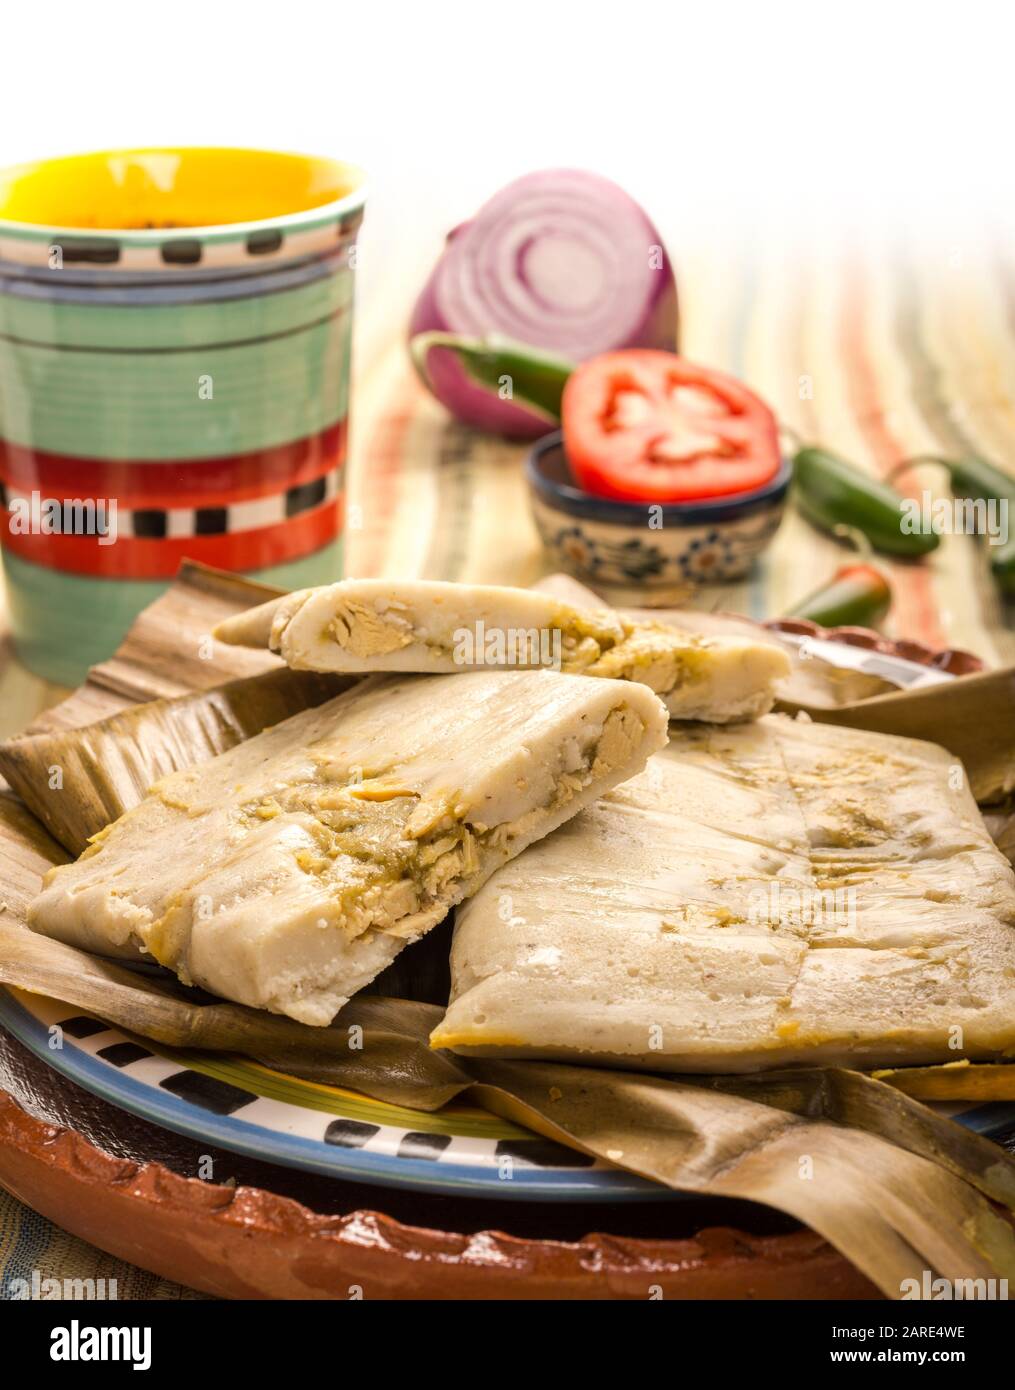 Tamales Oaxaqueños, Mexican dish made with corn dough, chicken or pork and chili, wrapped in a banana leaves. Stock Photo